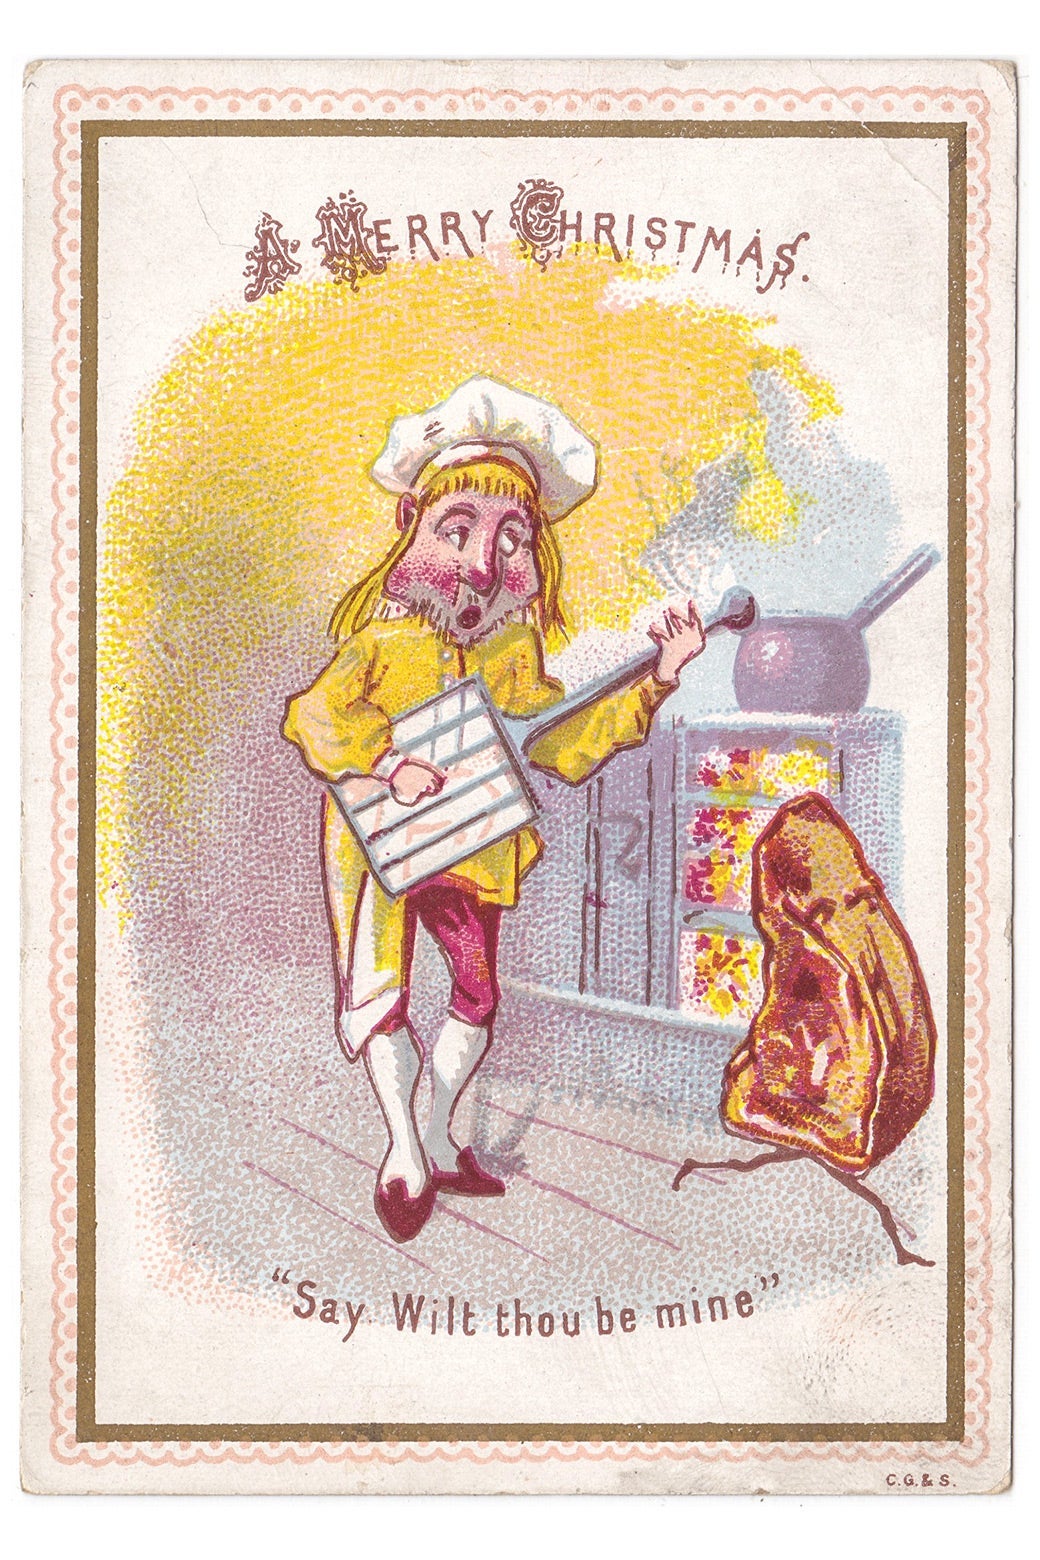 Illustration of a cook holding a spoon beside a pot on the stove as a cut of beef with legs runs away in the corner